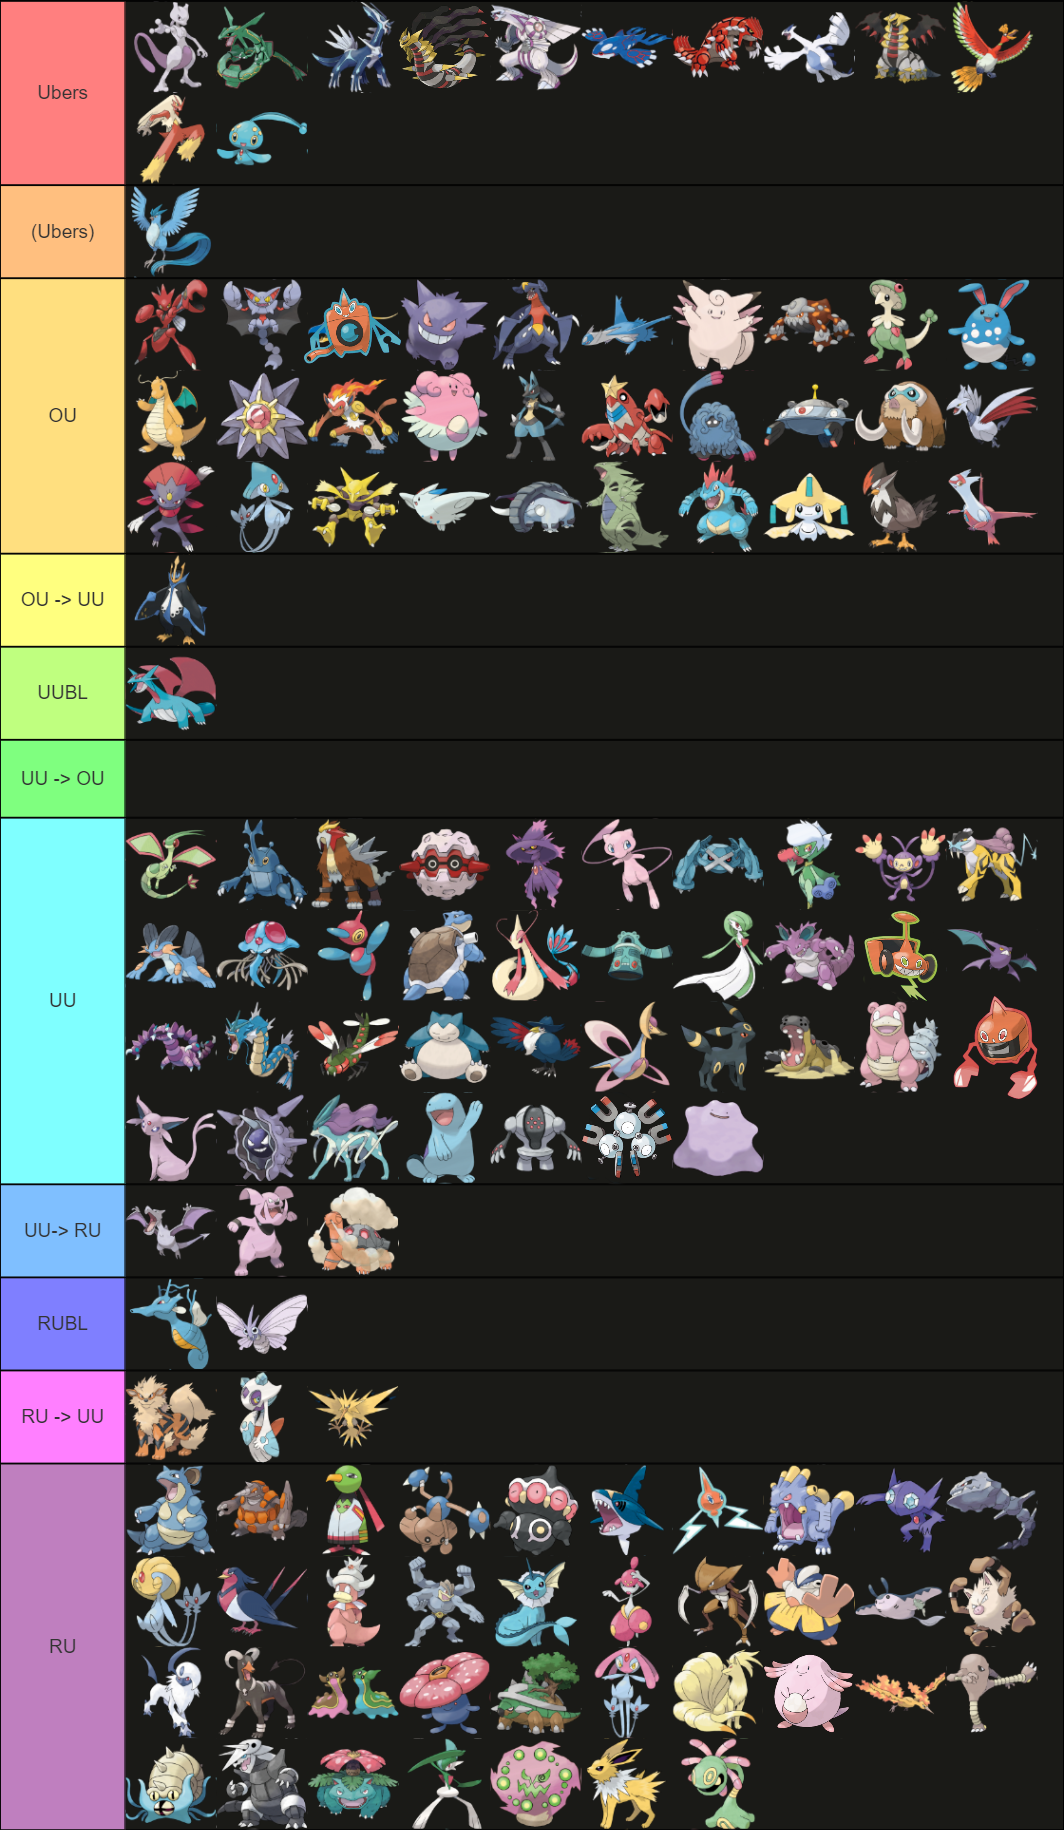 bdsp visual tier list2.png